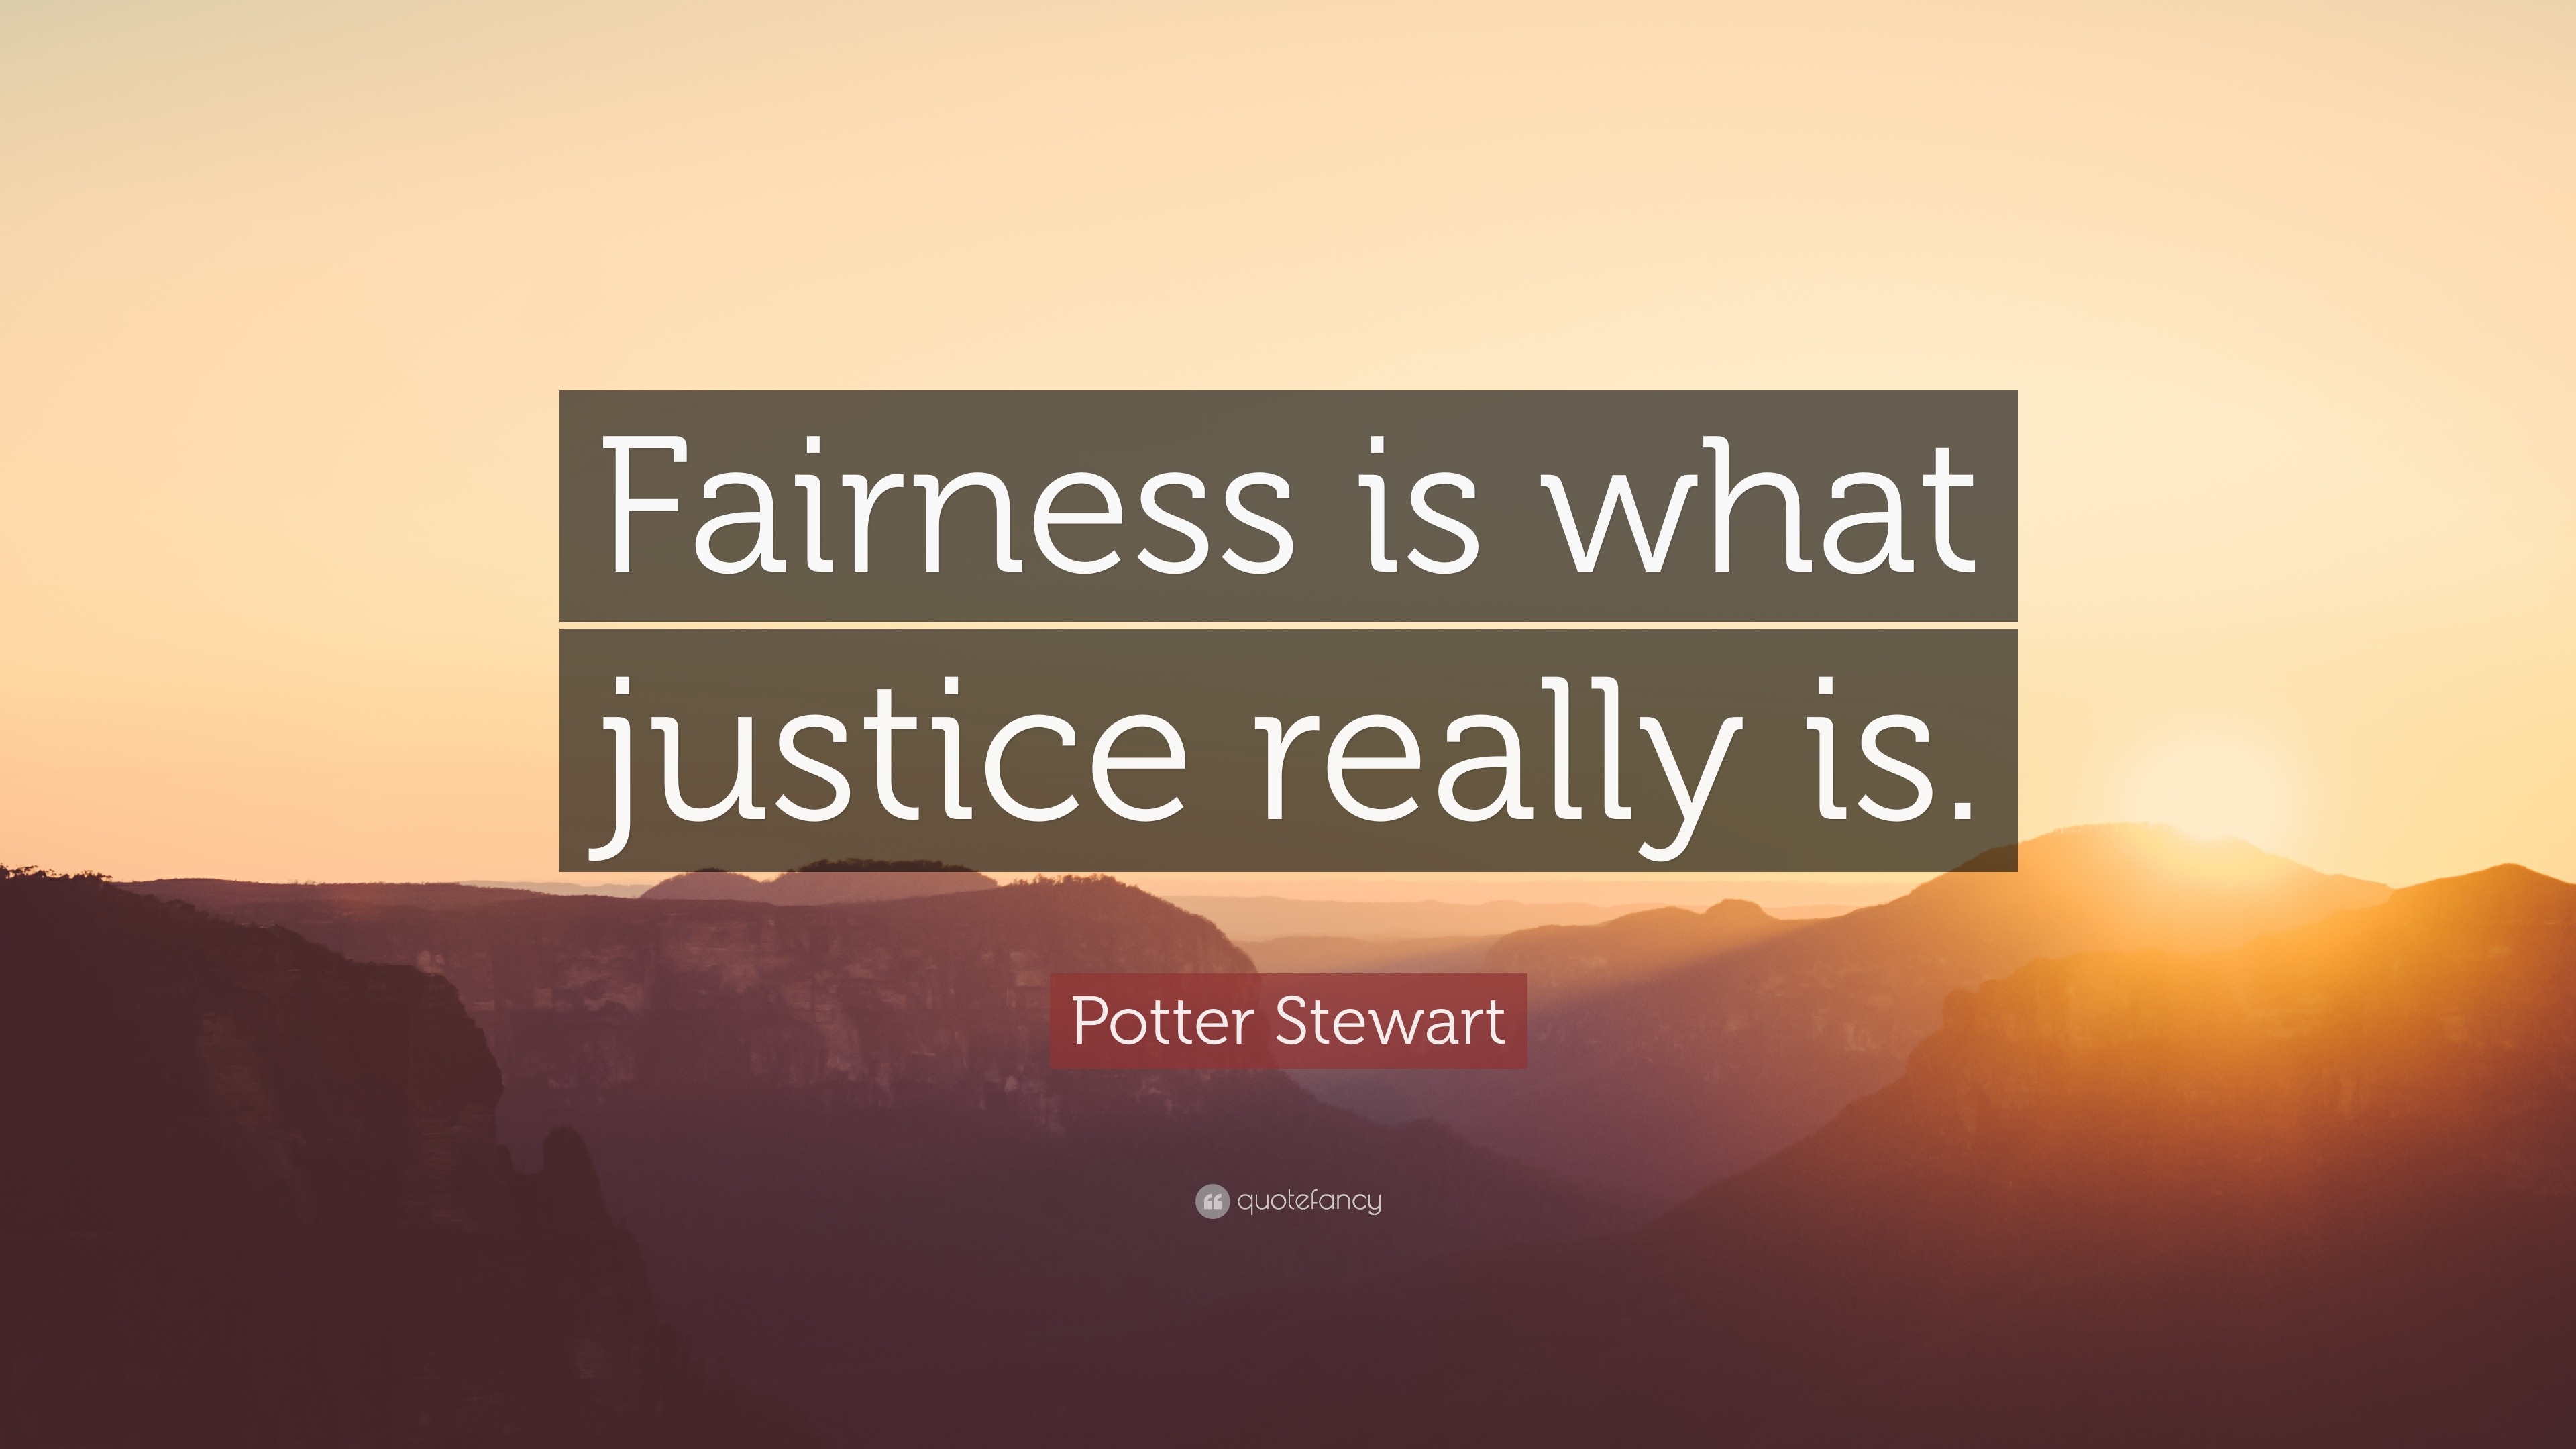 justice as fairness